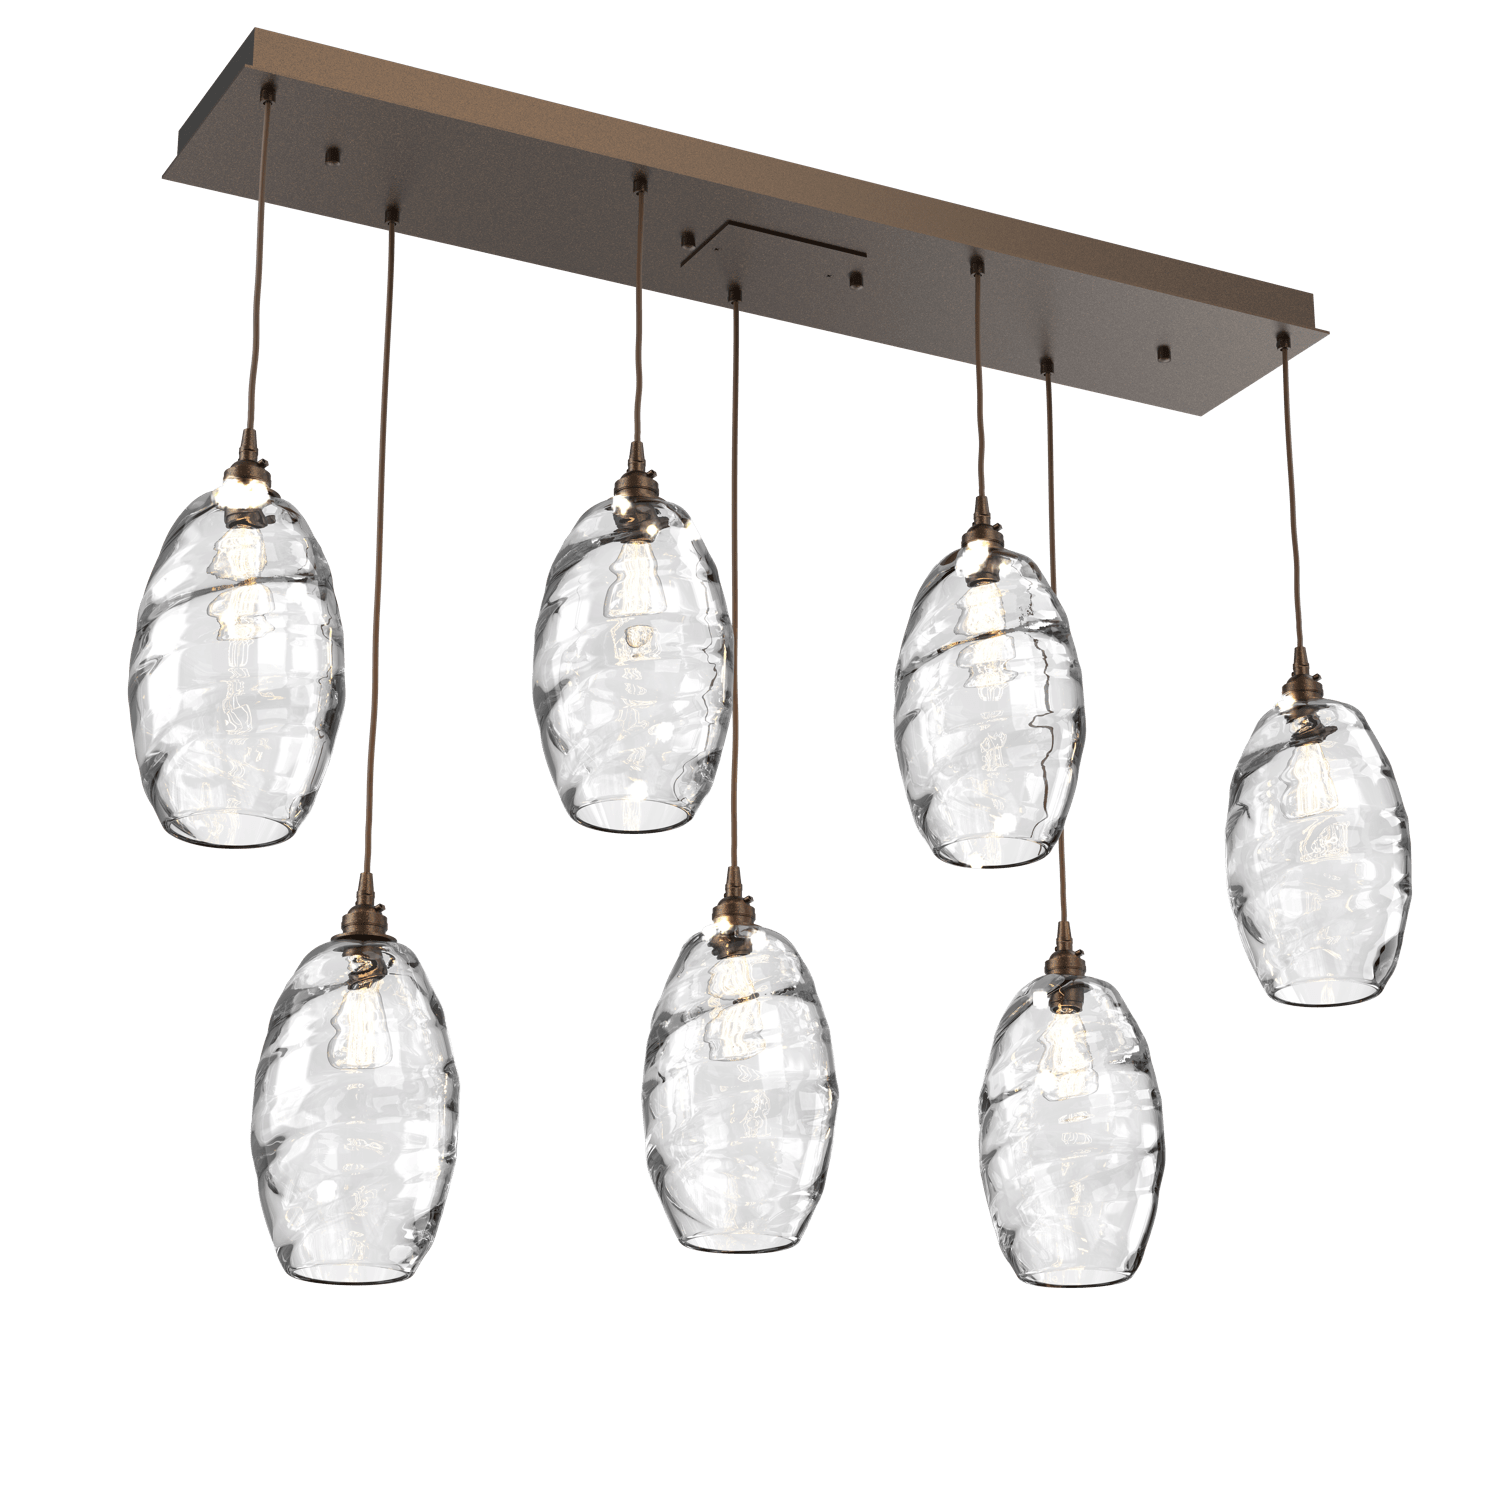 PLB0035-07-FB-OC-Hammerton-Studio-Optic-Blown-Glass-Elisse-7-light-linear-pendant-chandelier-with-flat-bronze-finish-and-optic-clear-blown-glass-shades-and-incandescent-lamping